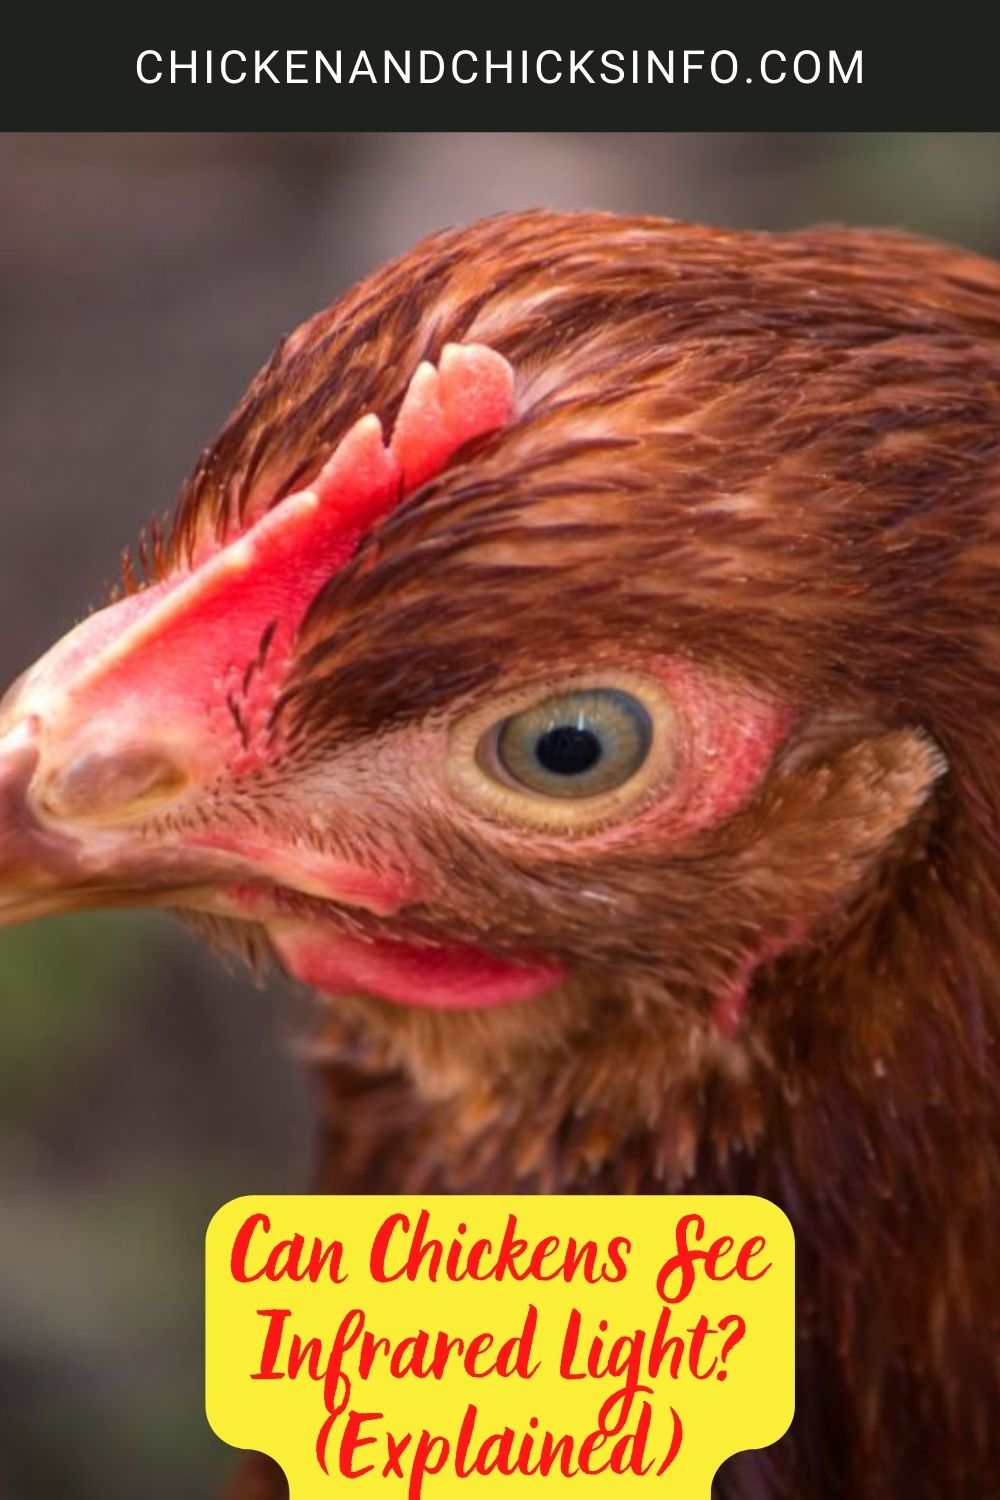 Can Chickens See Infrared Light? (Explained) poster.